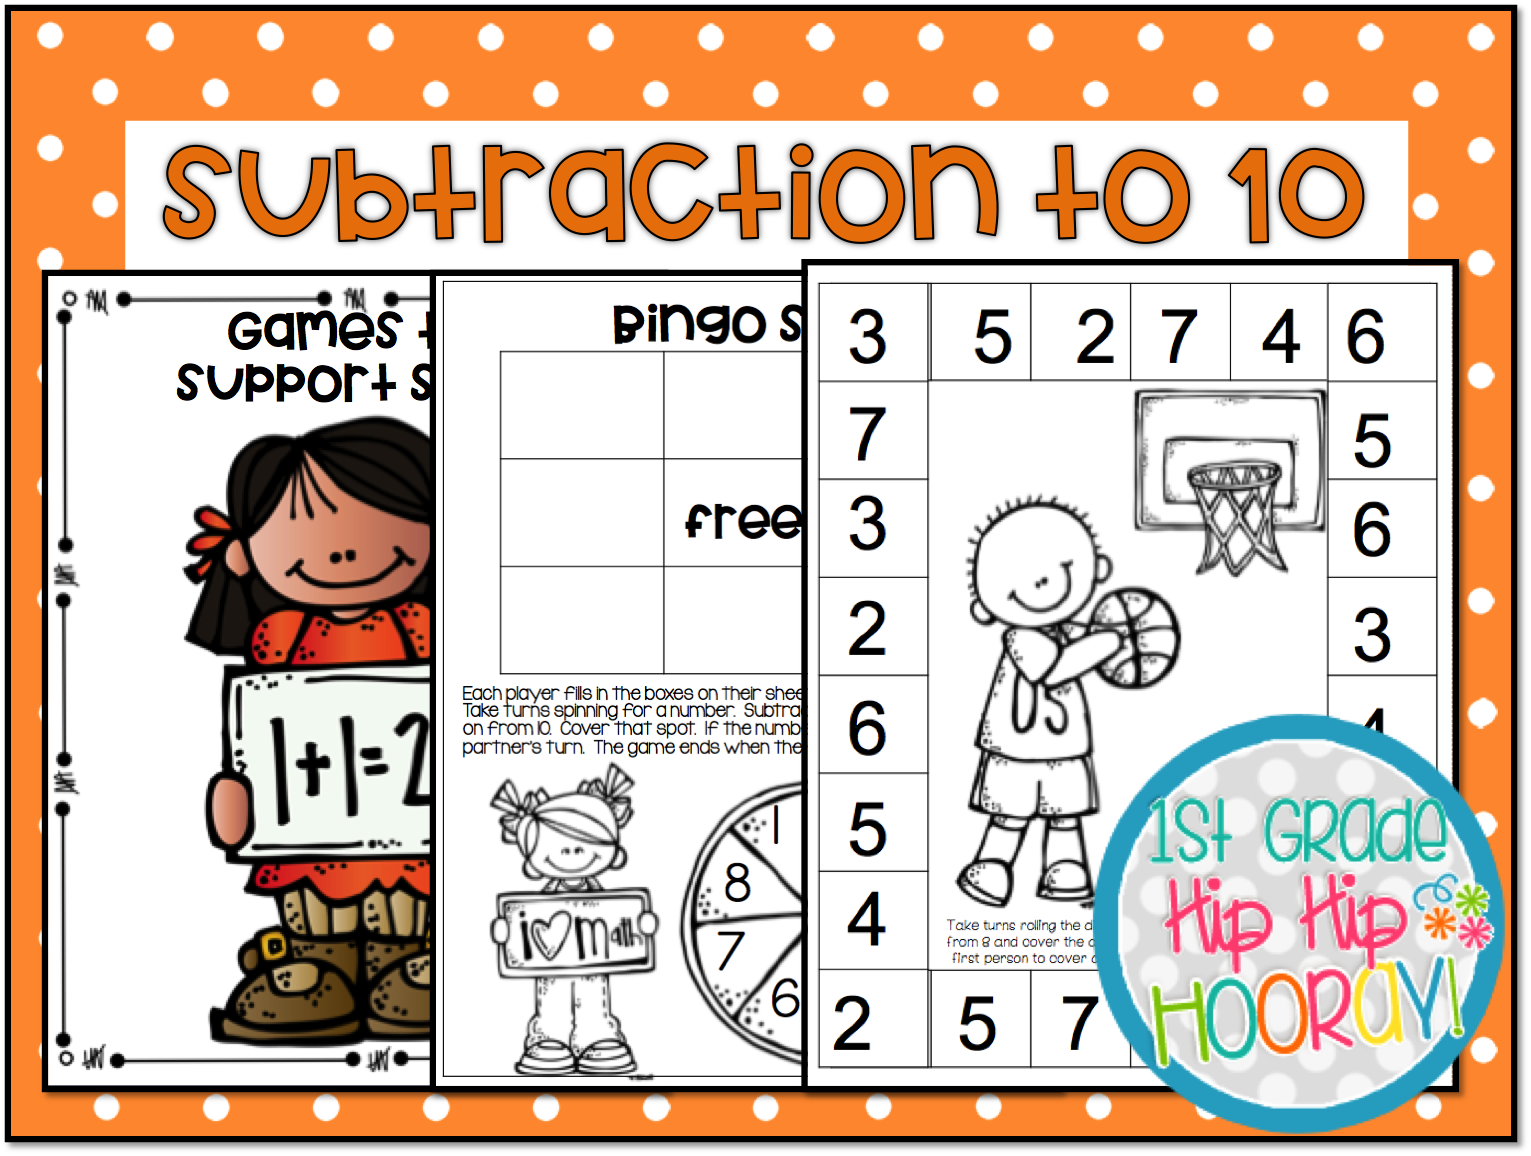 1st Grade Hip Hip Hooray!: Subtraction to 10...Tools and Games to Build